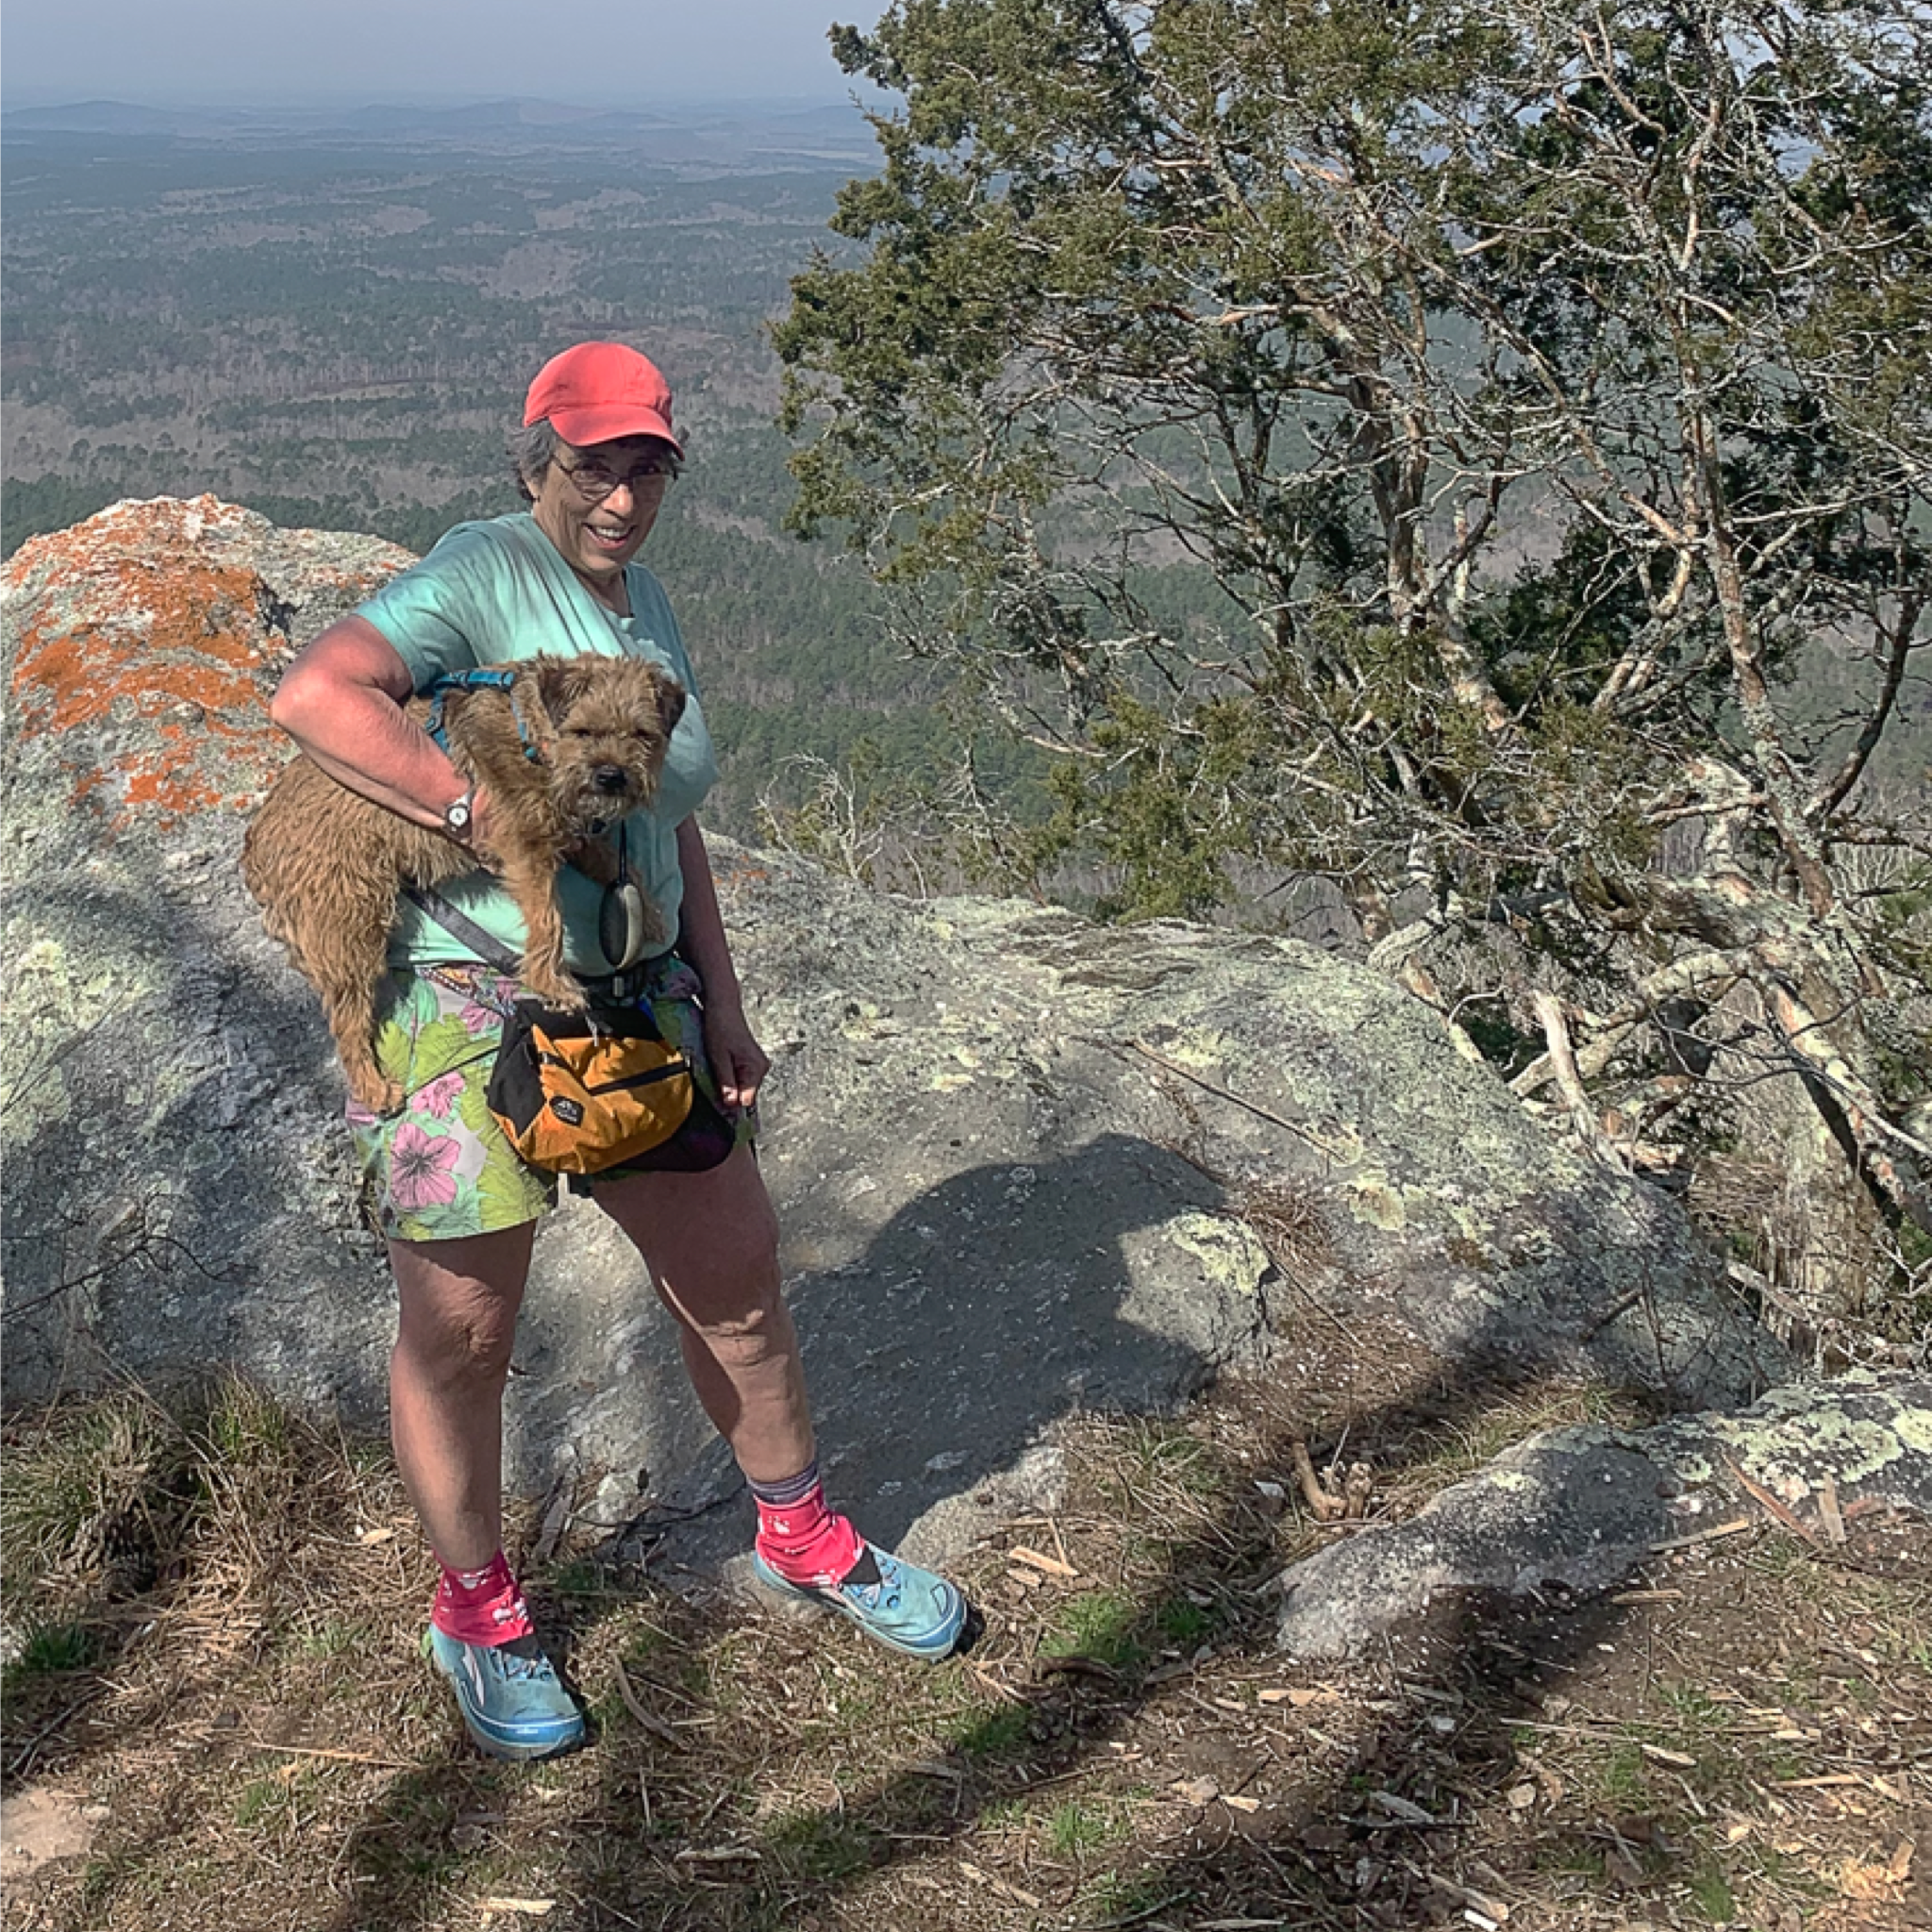 A woman poses with her small dog at a lookout point along the Cranberry Lake 50 mile hike